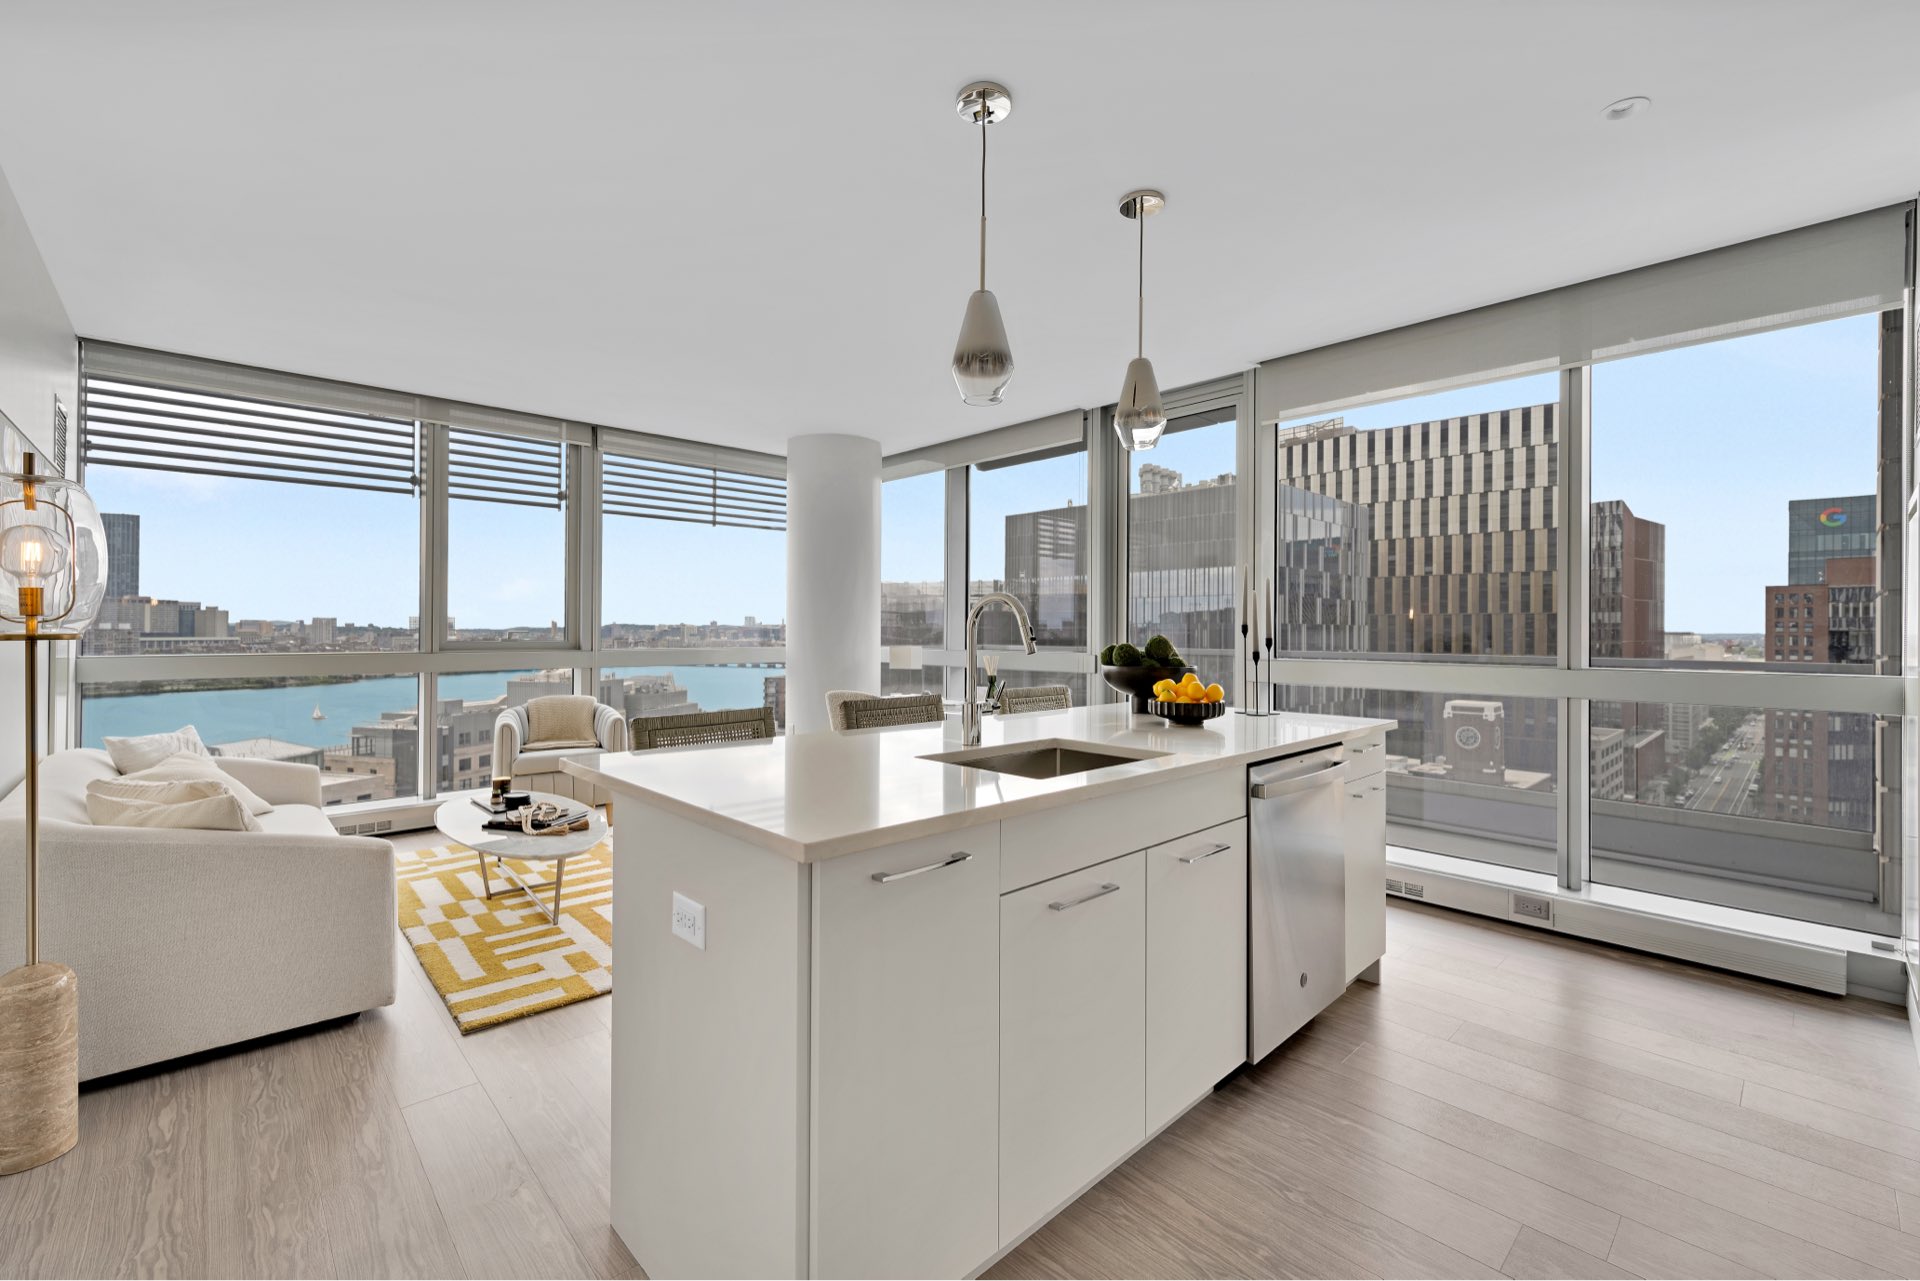 Built-in an unbelievable location, One65 Main takes full advantage of its amazing views of the Charles River, Boston, and Cambridge.